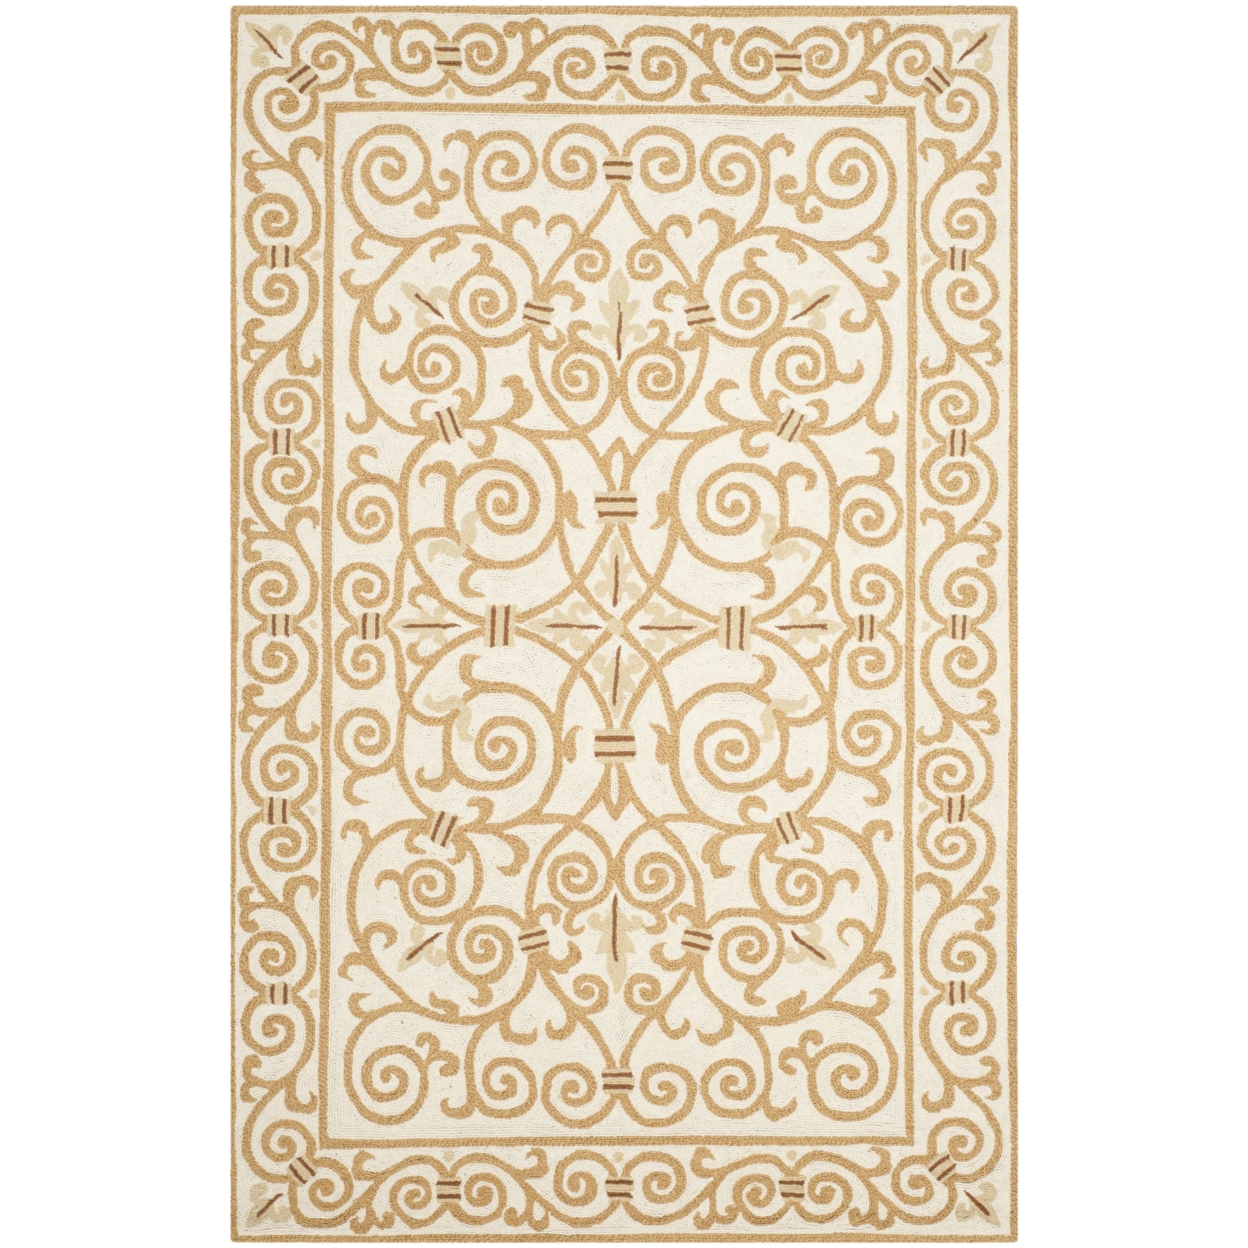 SAFAVIEH Chelsea HK11P Hand-hooked Ivory / Gold Rug - 7' 6 X 9' 6 Oval